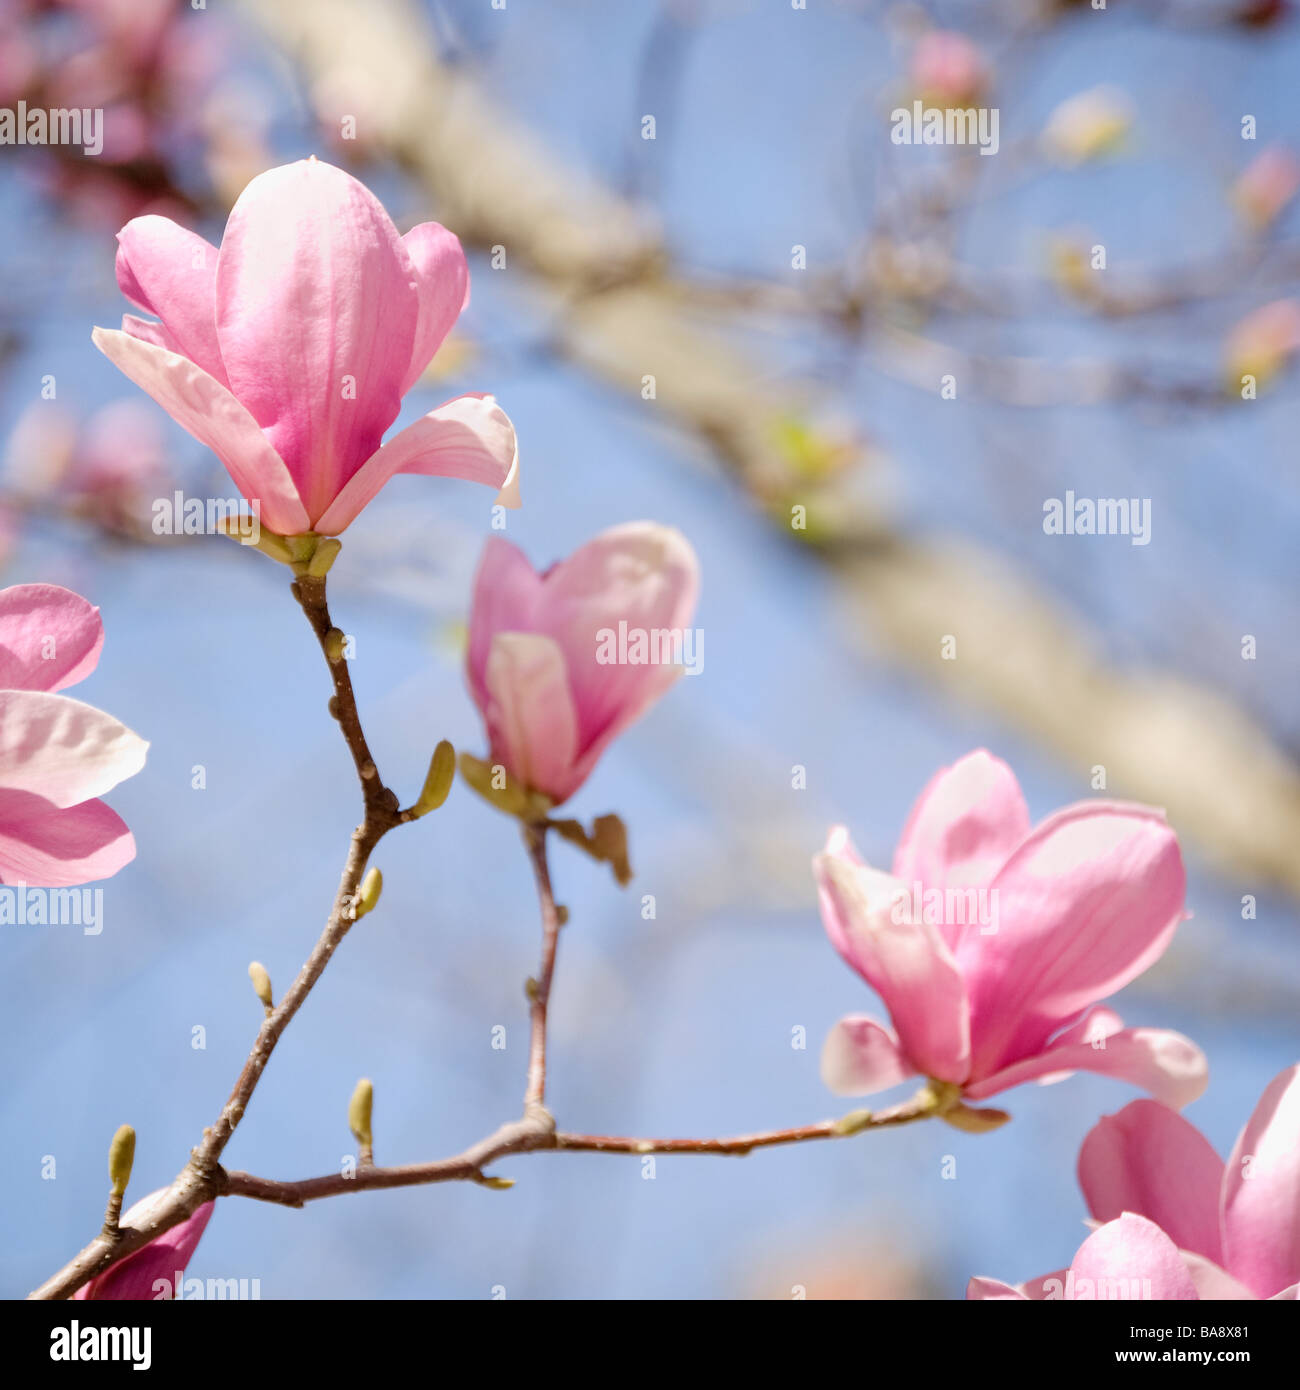 Close up of spring flowers on tree Stock Photo